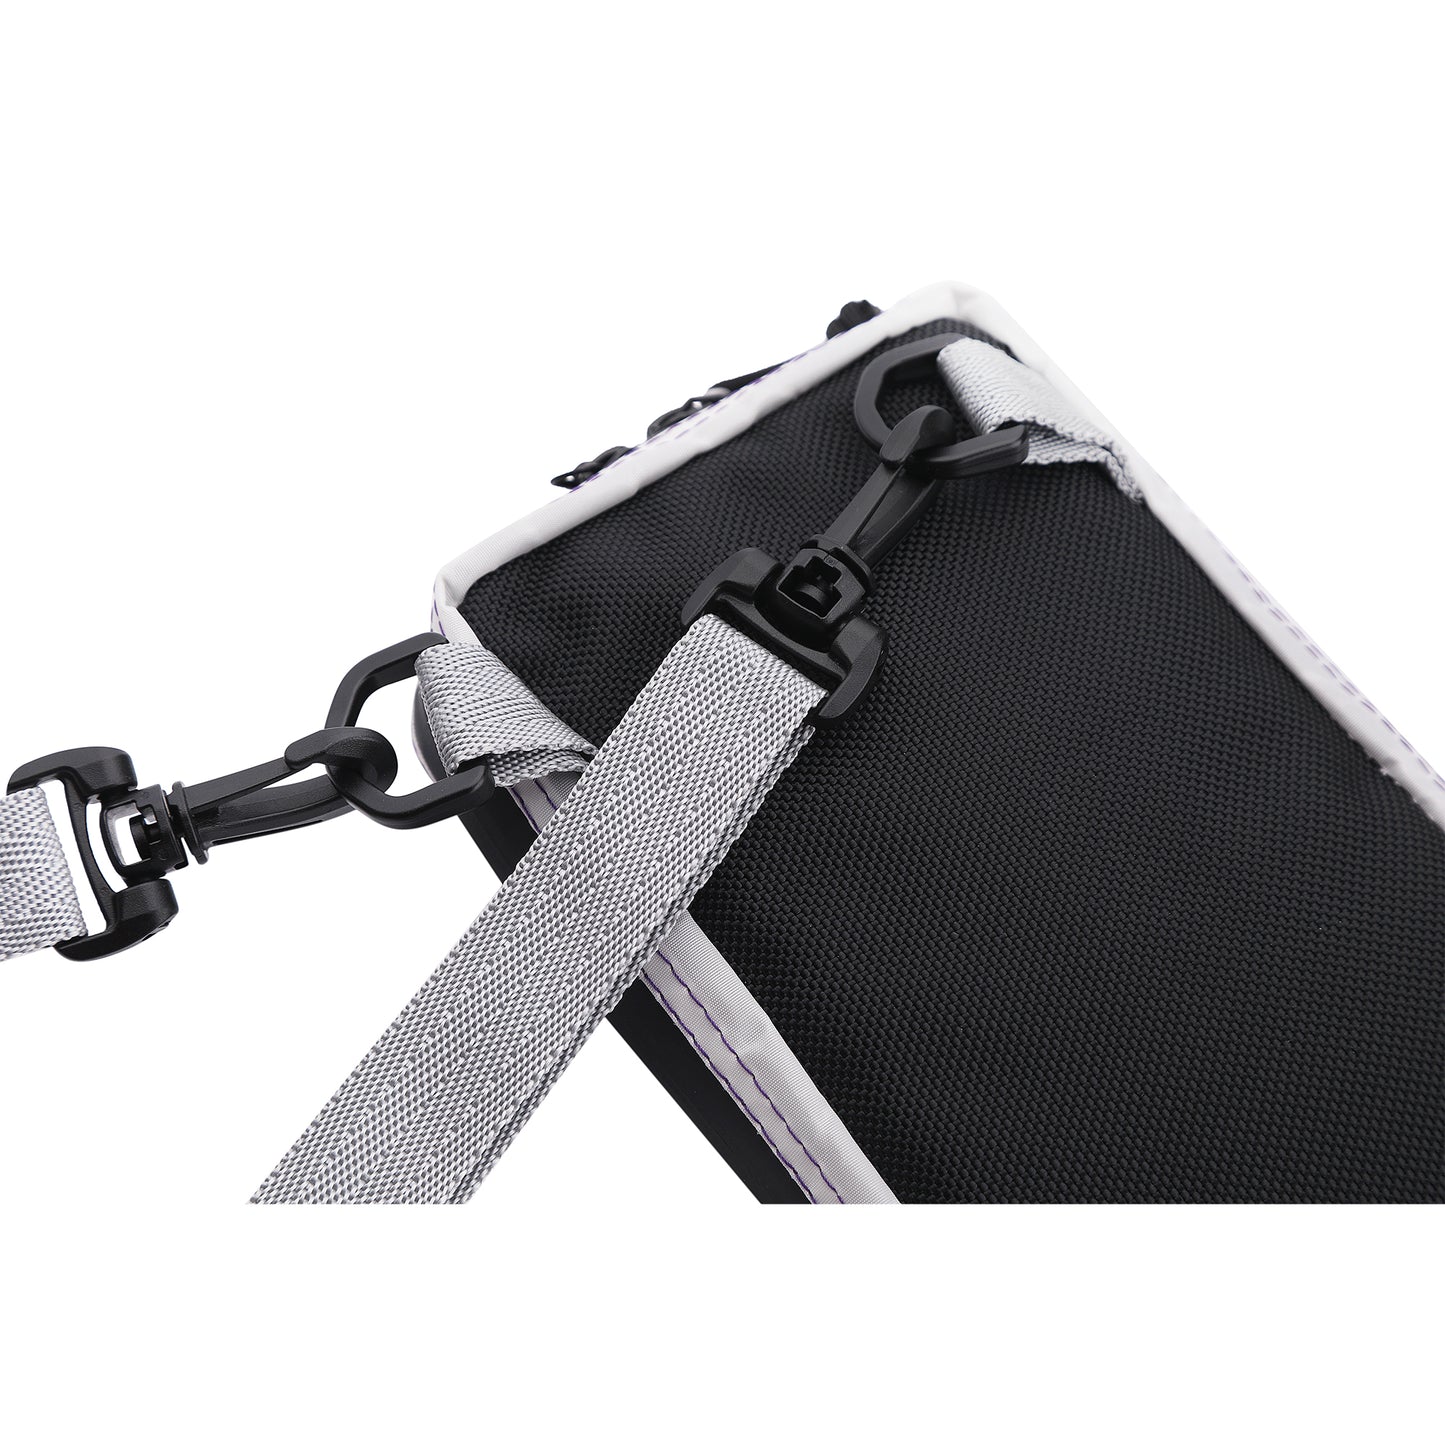 Detachable carabiners and strap